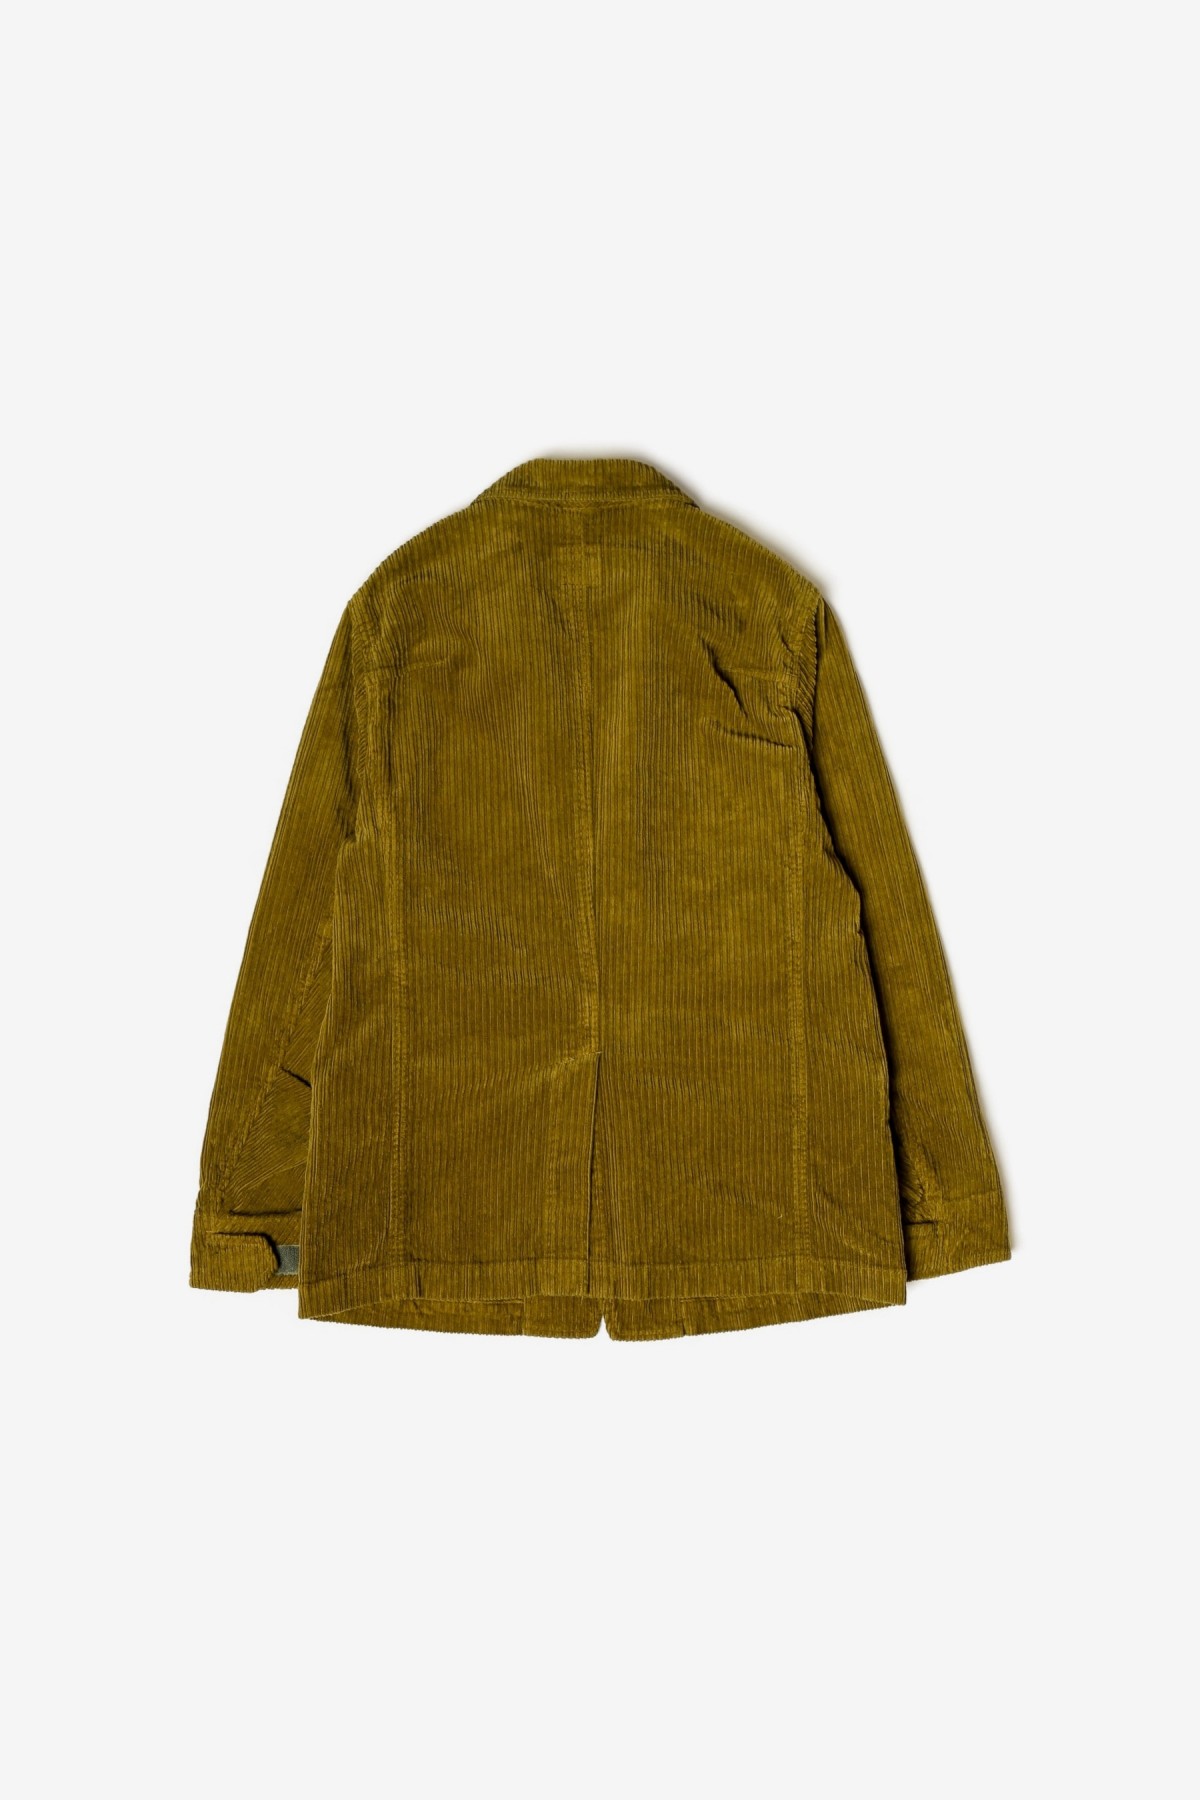 ts(s) Tailored Military Jacket in Pistachio